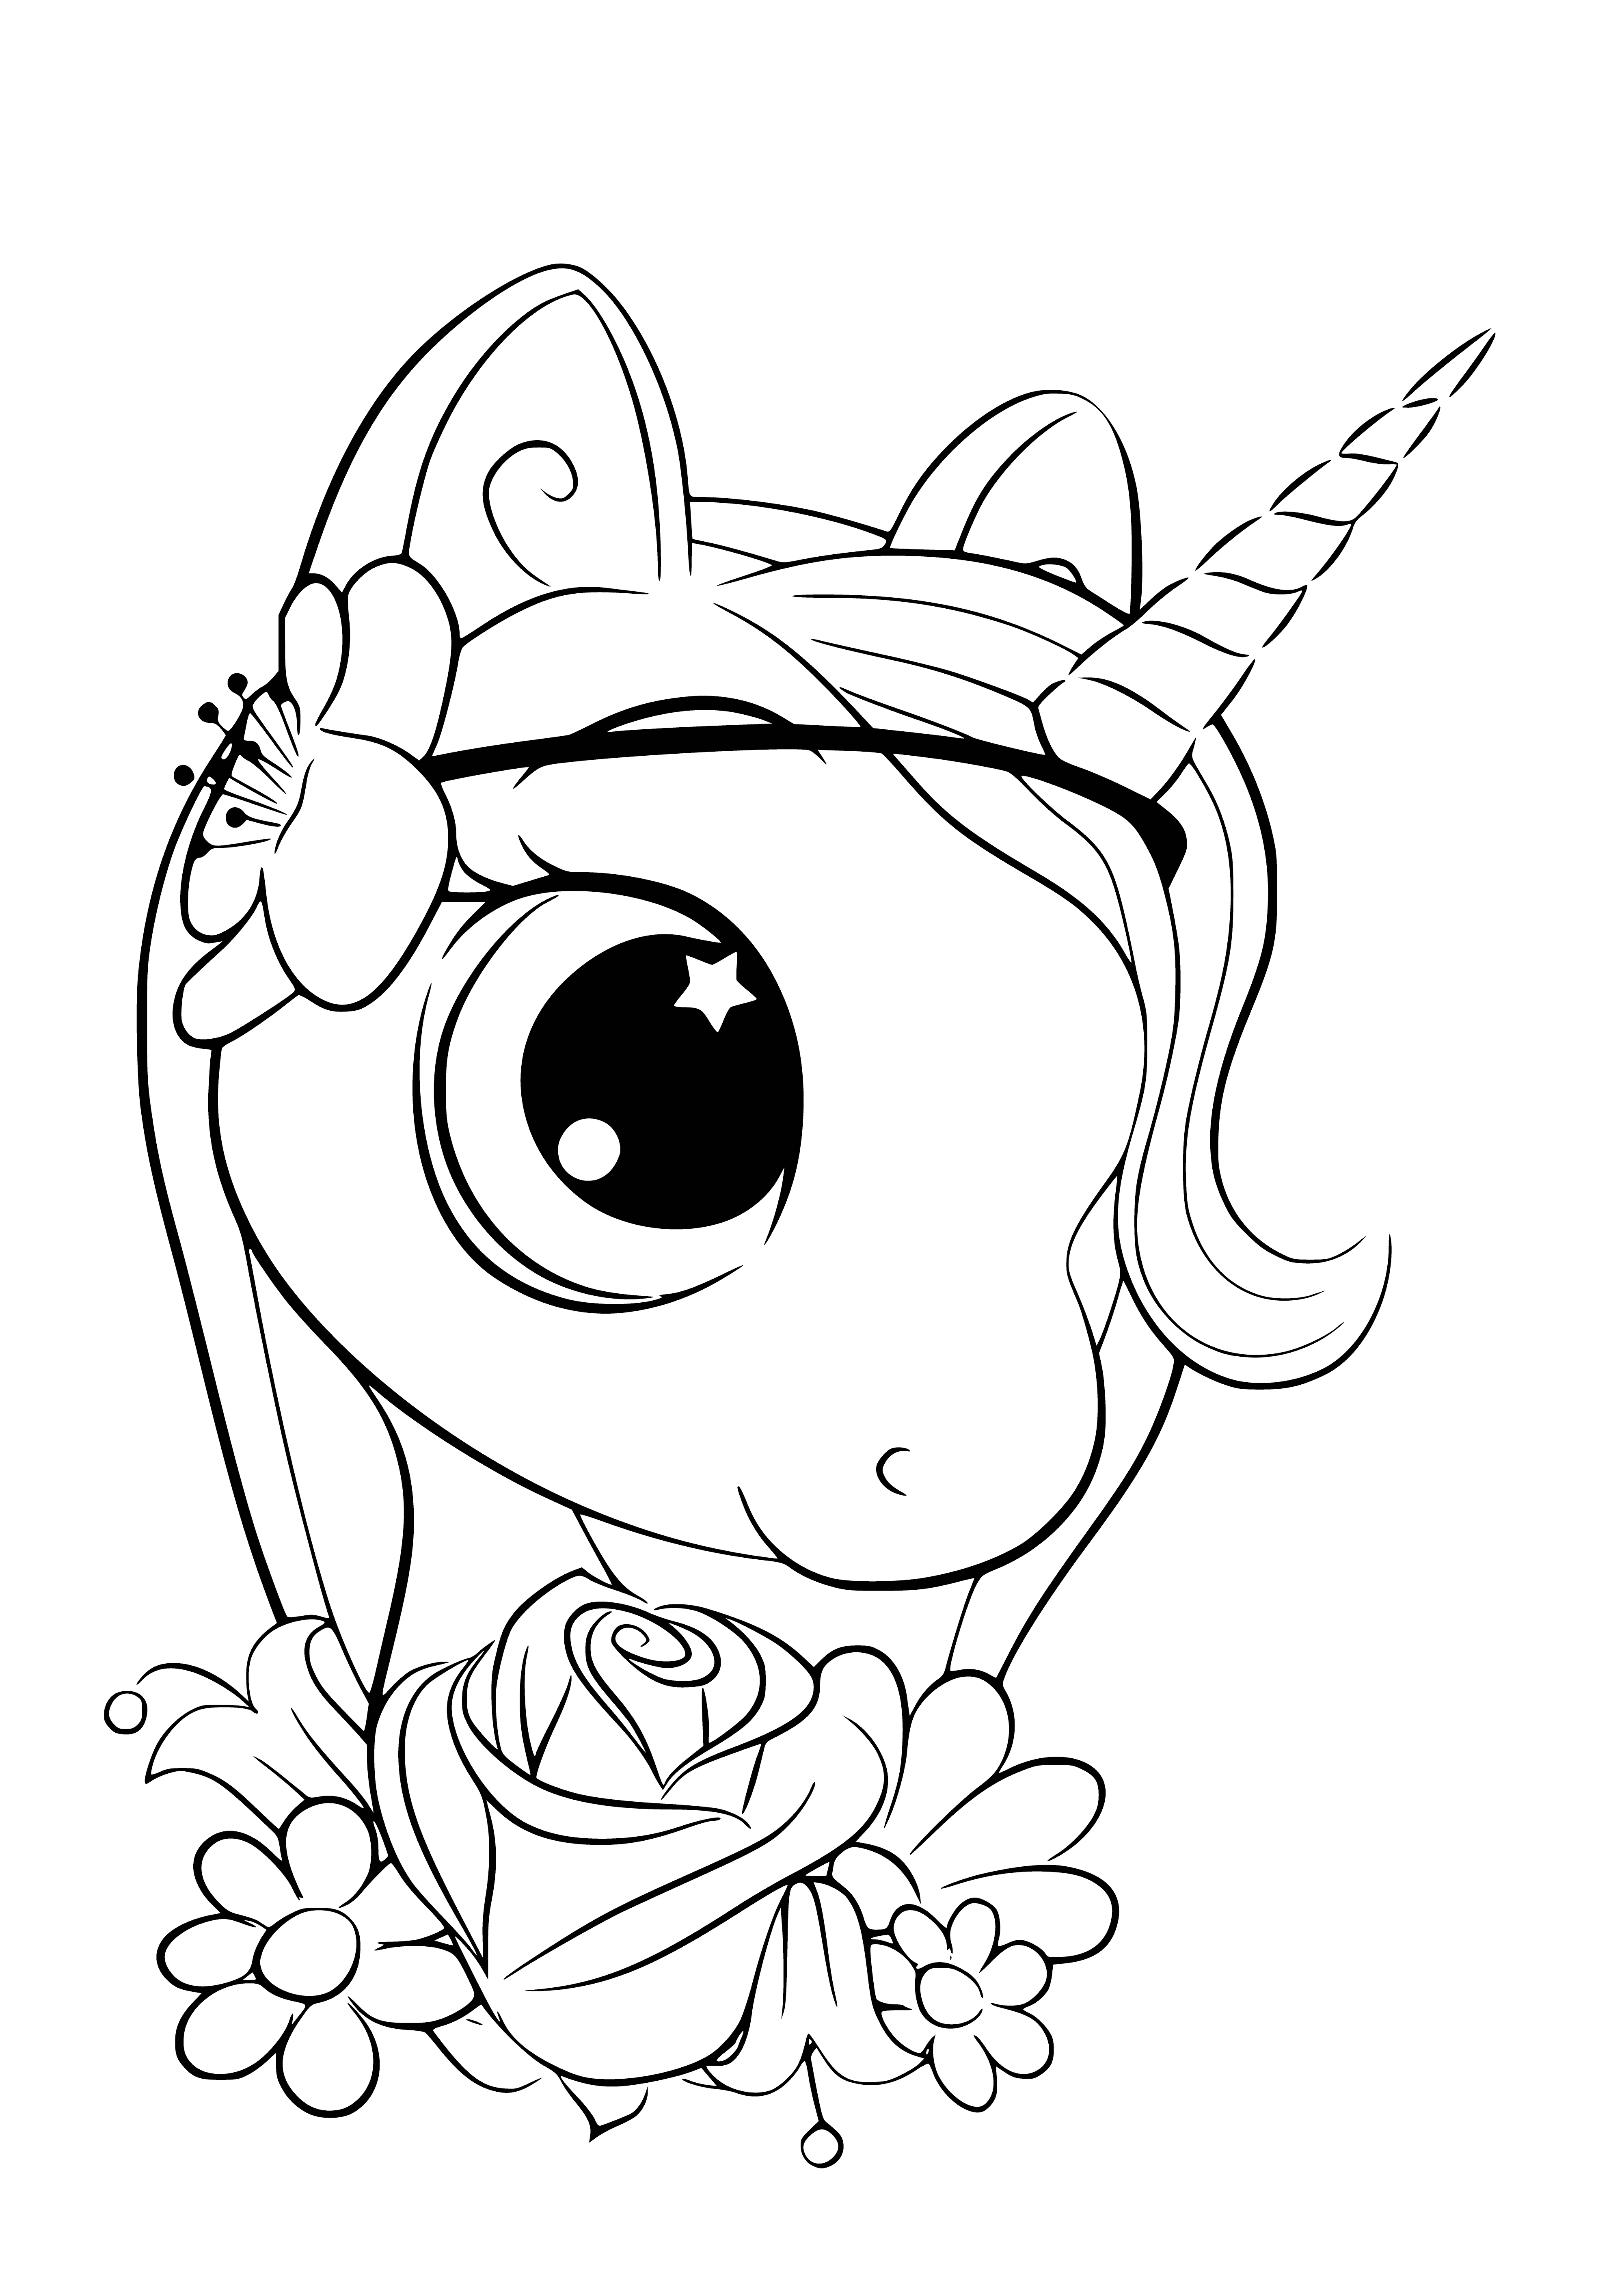 Unicorn girl coloring page